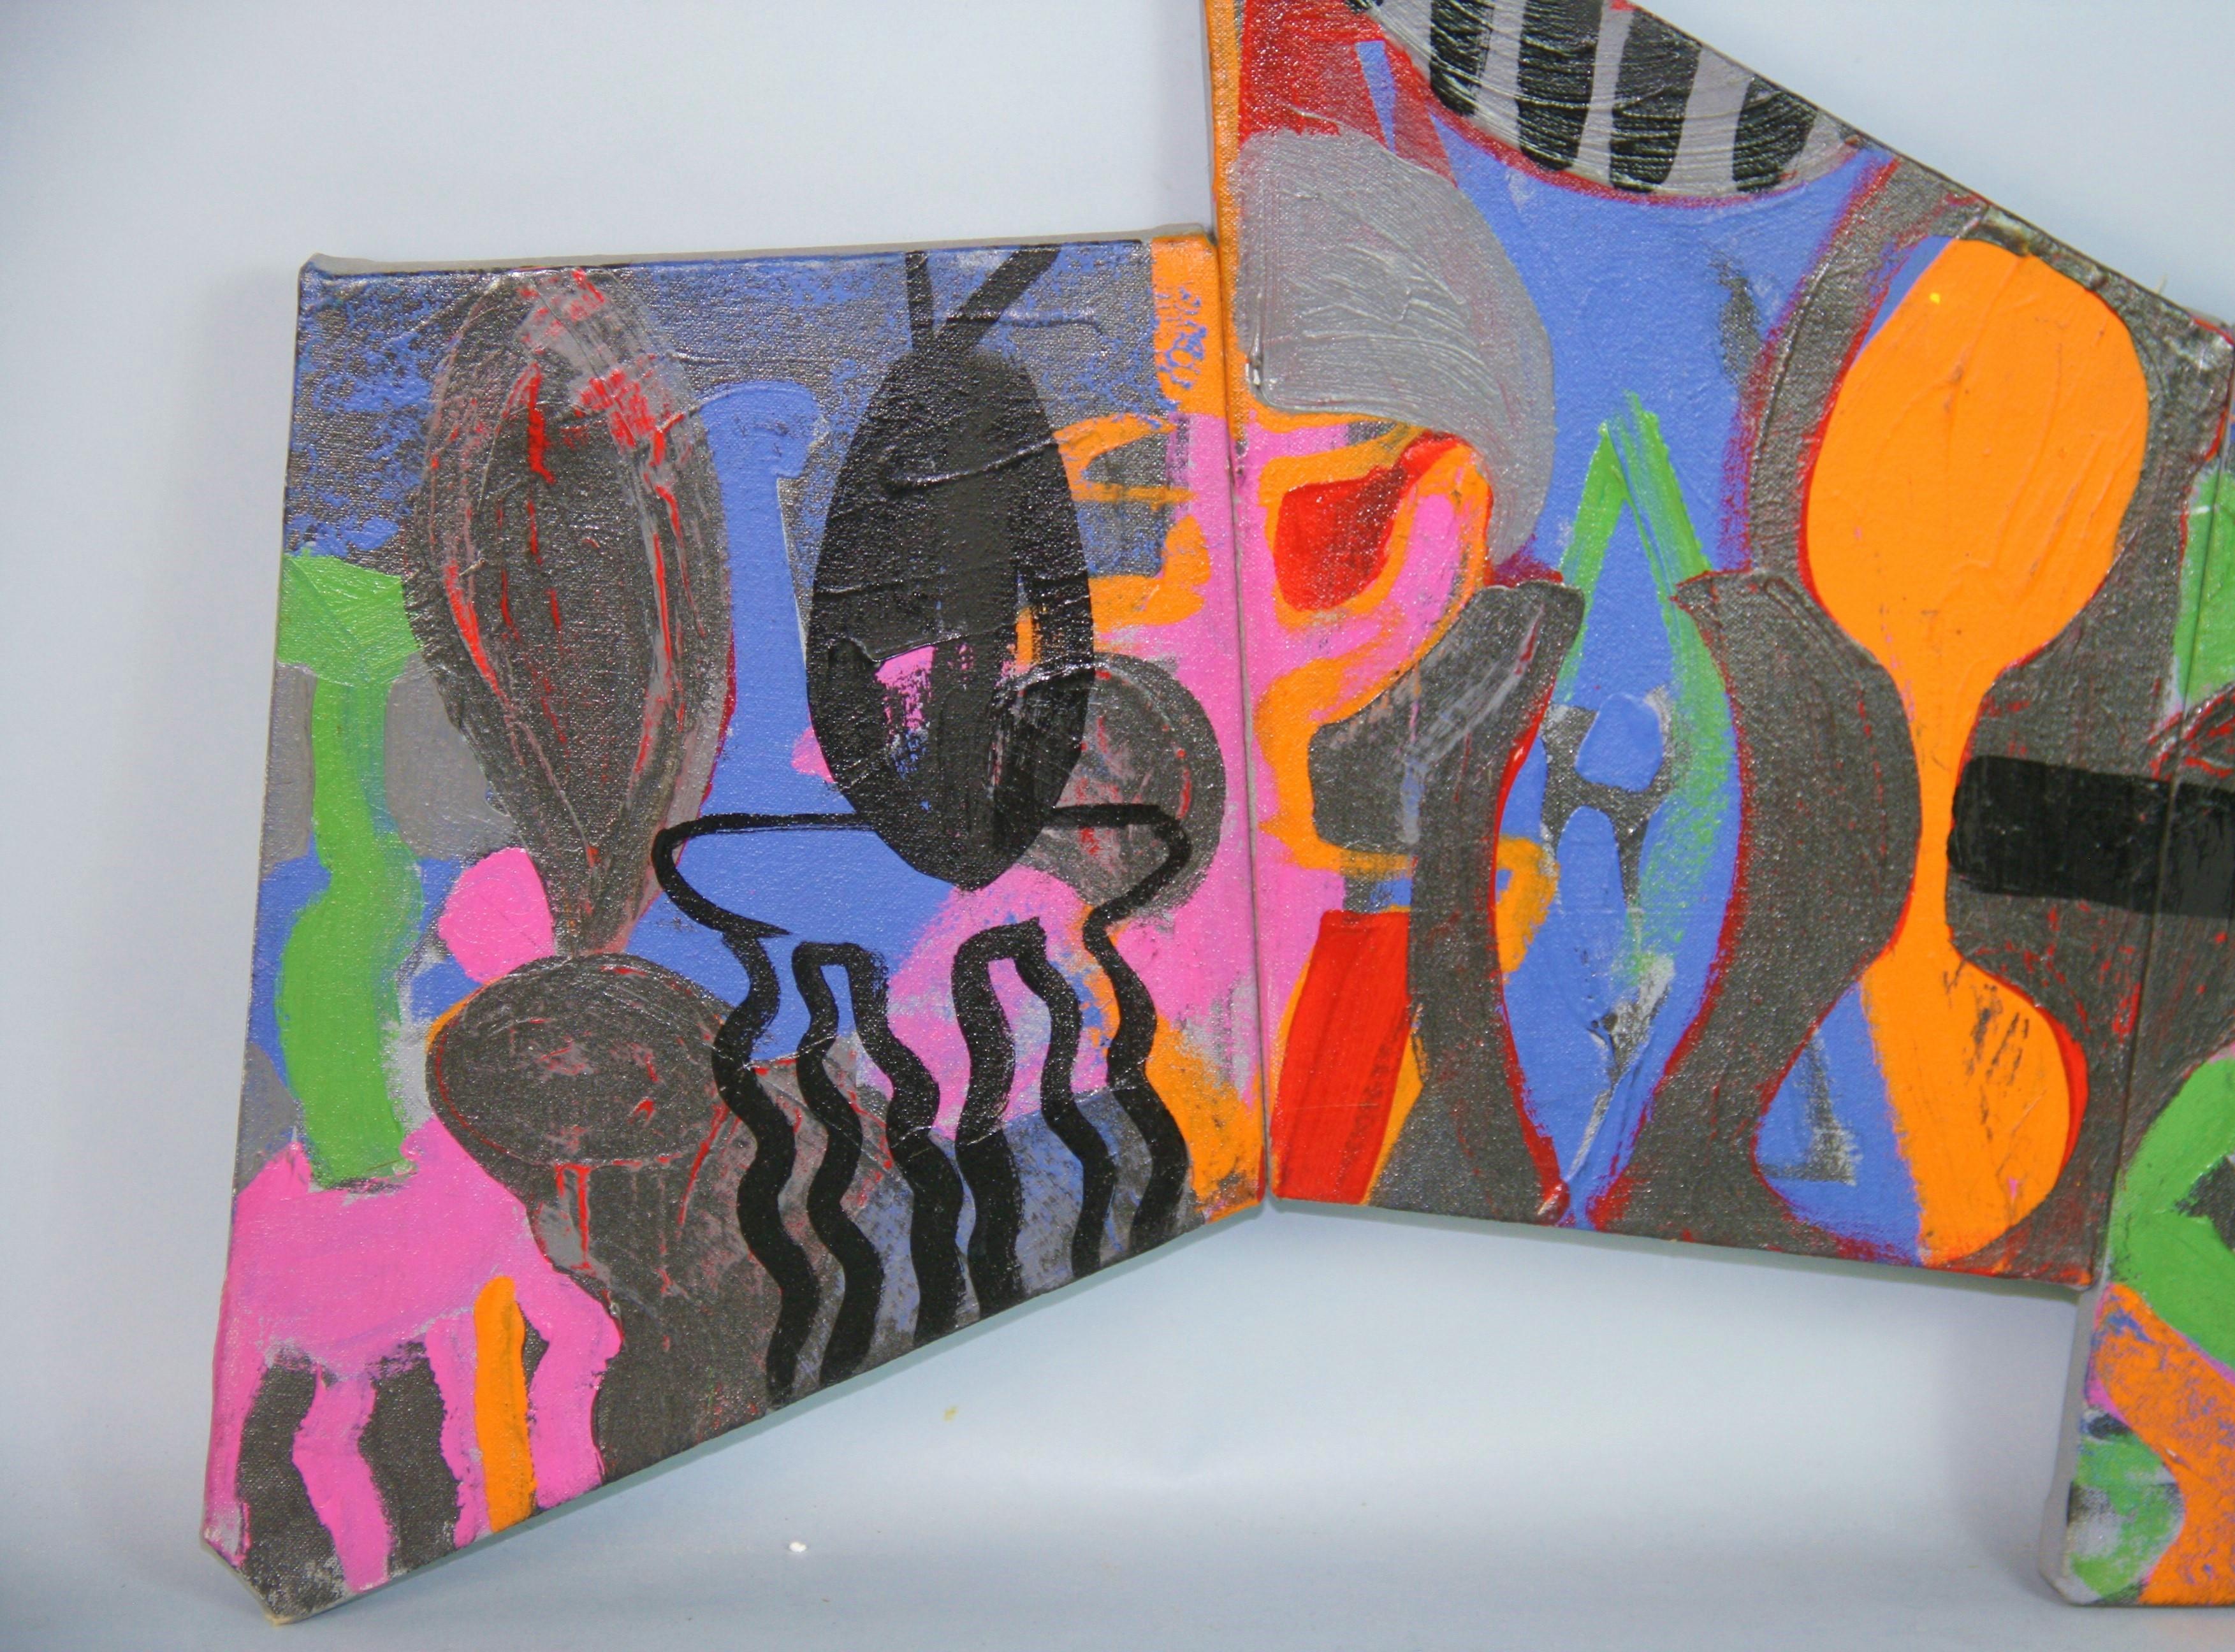 Vintage American Abstract Expressionist Triptych Oil Painting 1986 For Sale 1